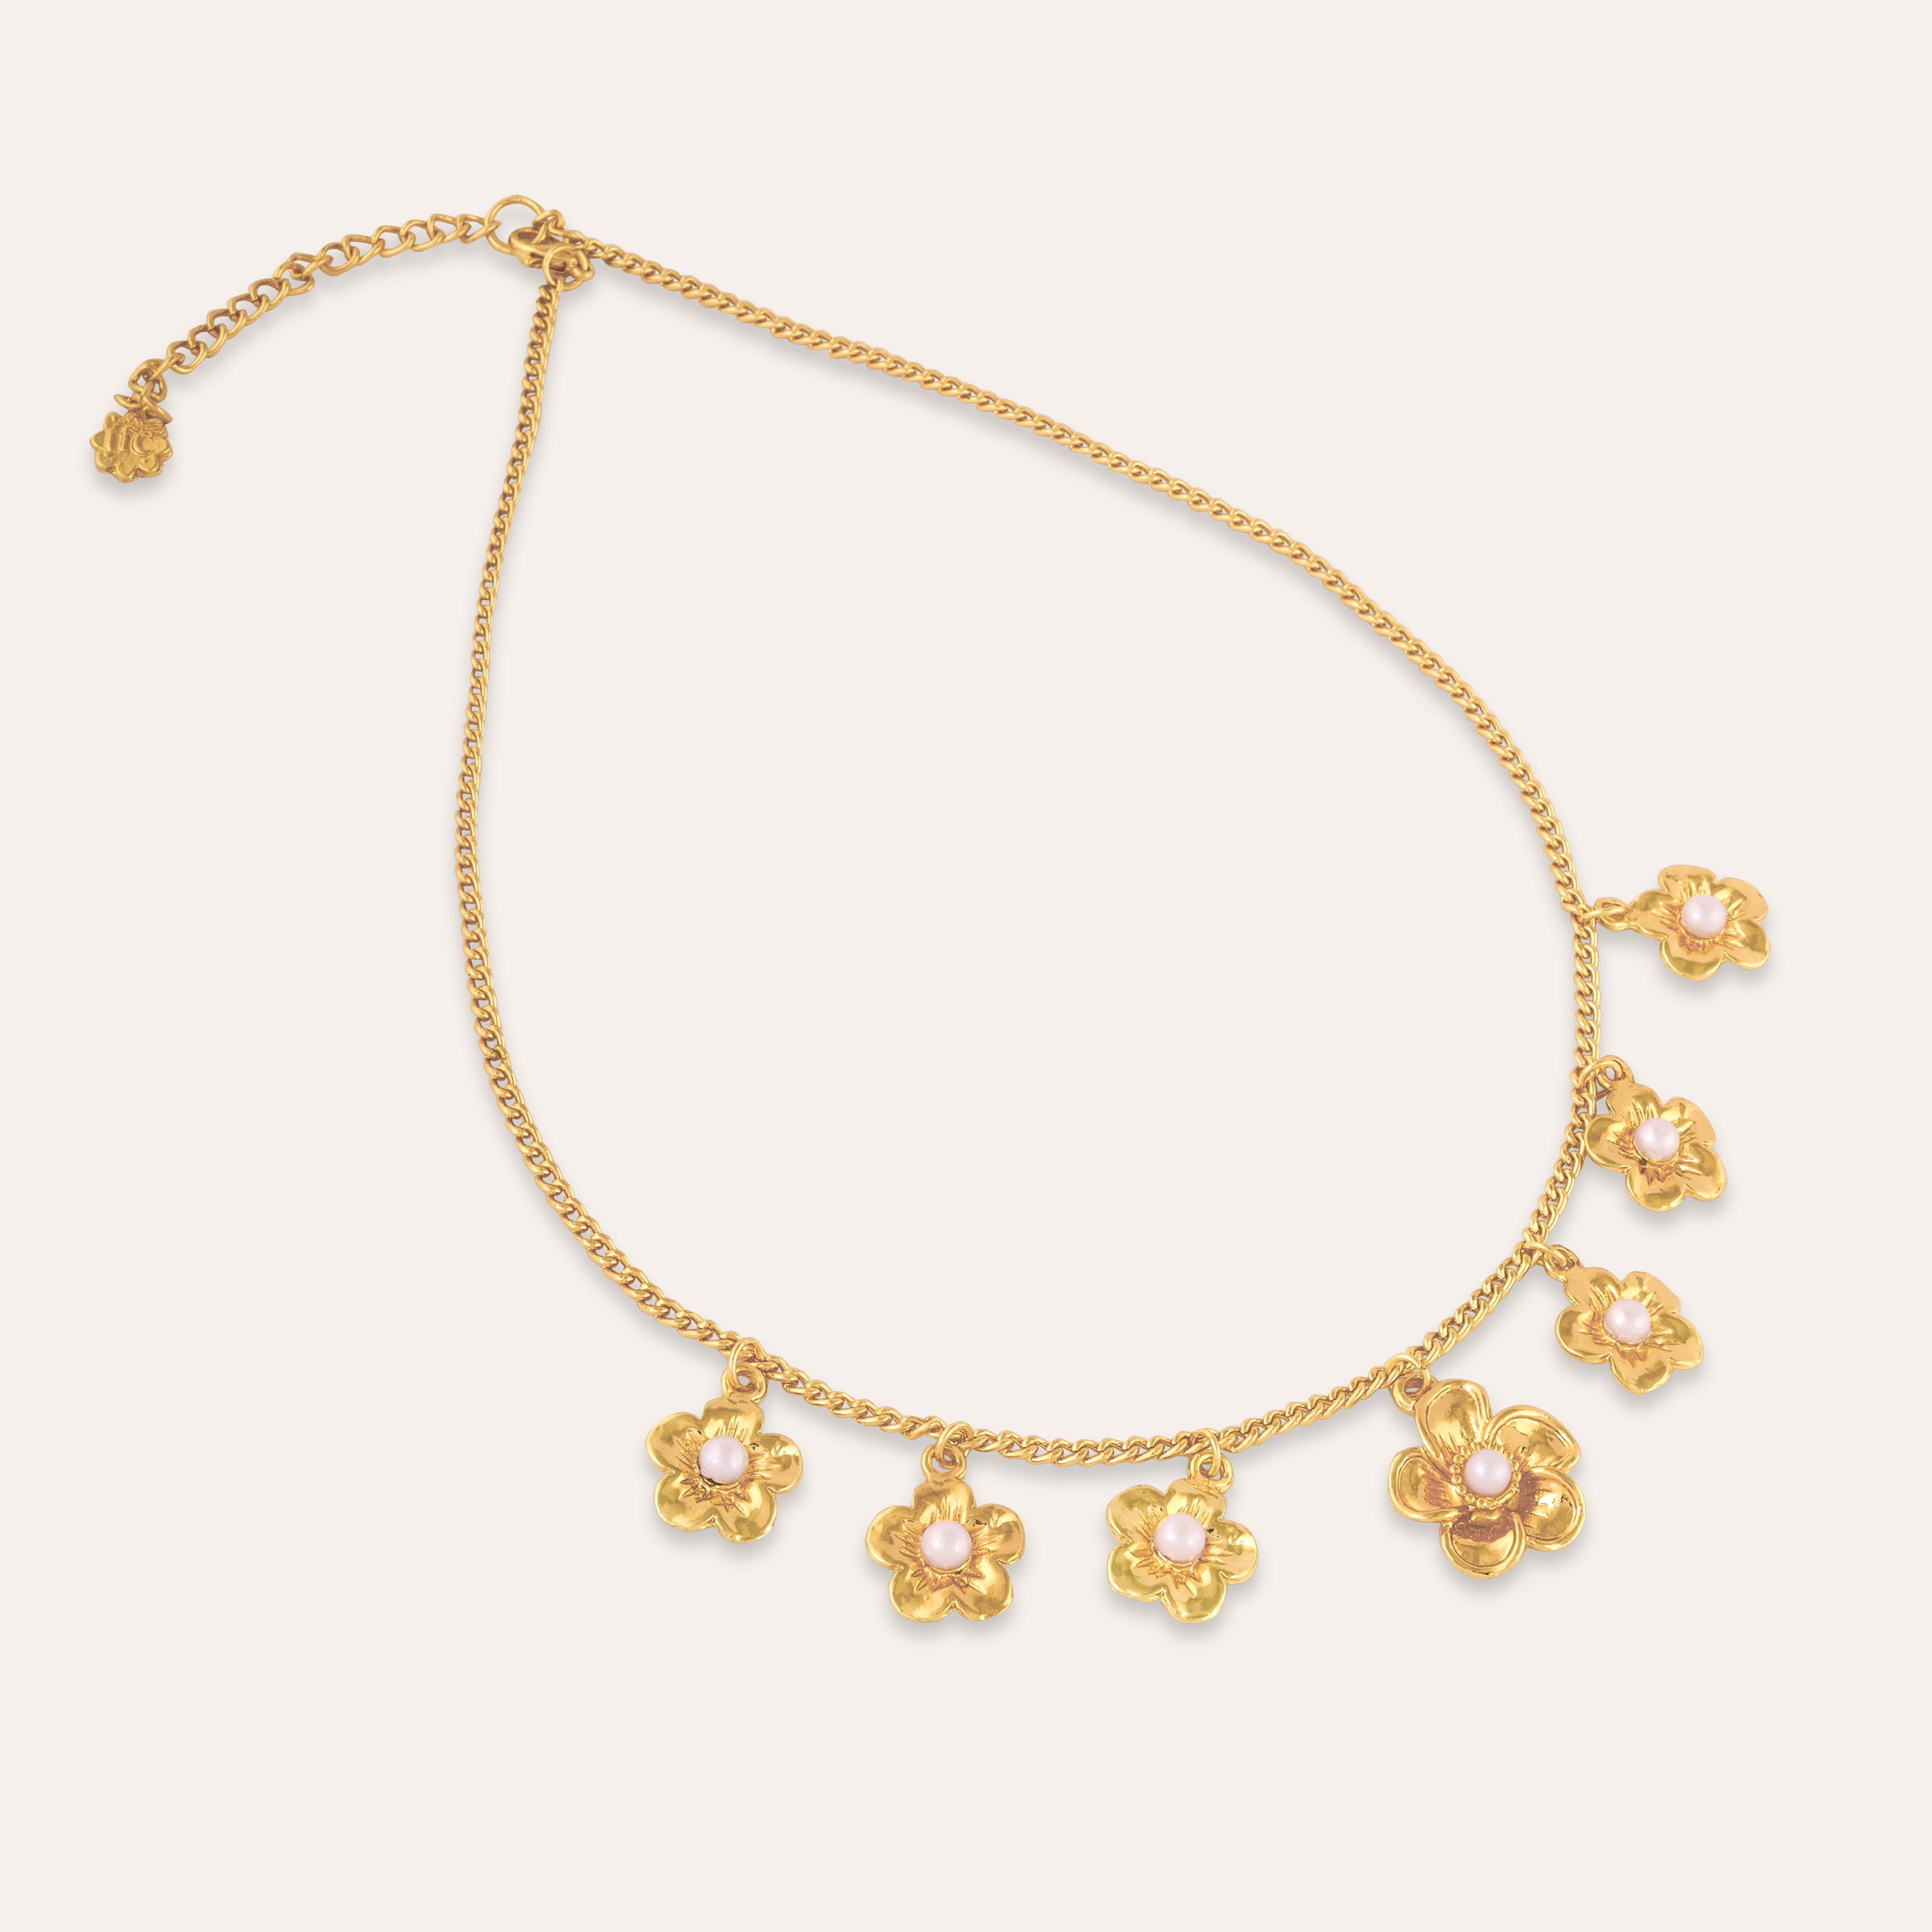 TFC Flower Pearls Charms Gold Plated Necklace-Enhance your elegance with our collection of gold-plated necklaces for women. Choose from stunning pendant necklaces, chic choker necklaces, and trendy layered necklaces. Our sleek and dainty designs are both affordable and anti-tarnish, ensuring lasting beauty. Enjoy the cheapest fashion jewellery, lightweight and stylish- only at The Fun Company.